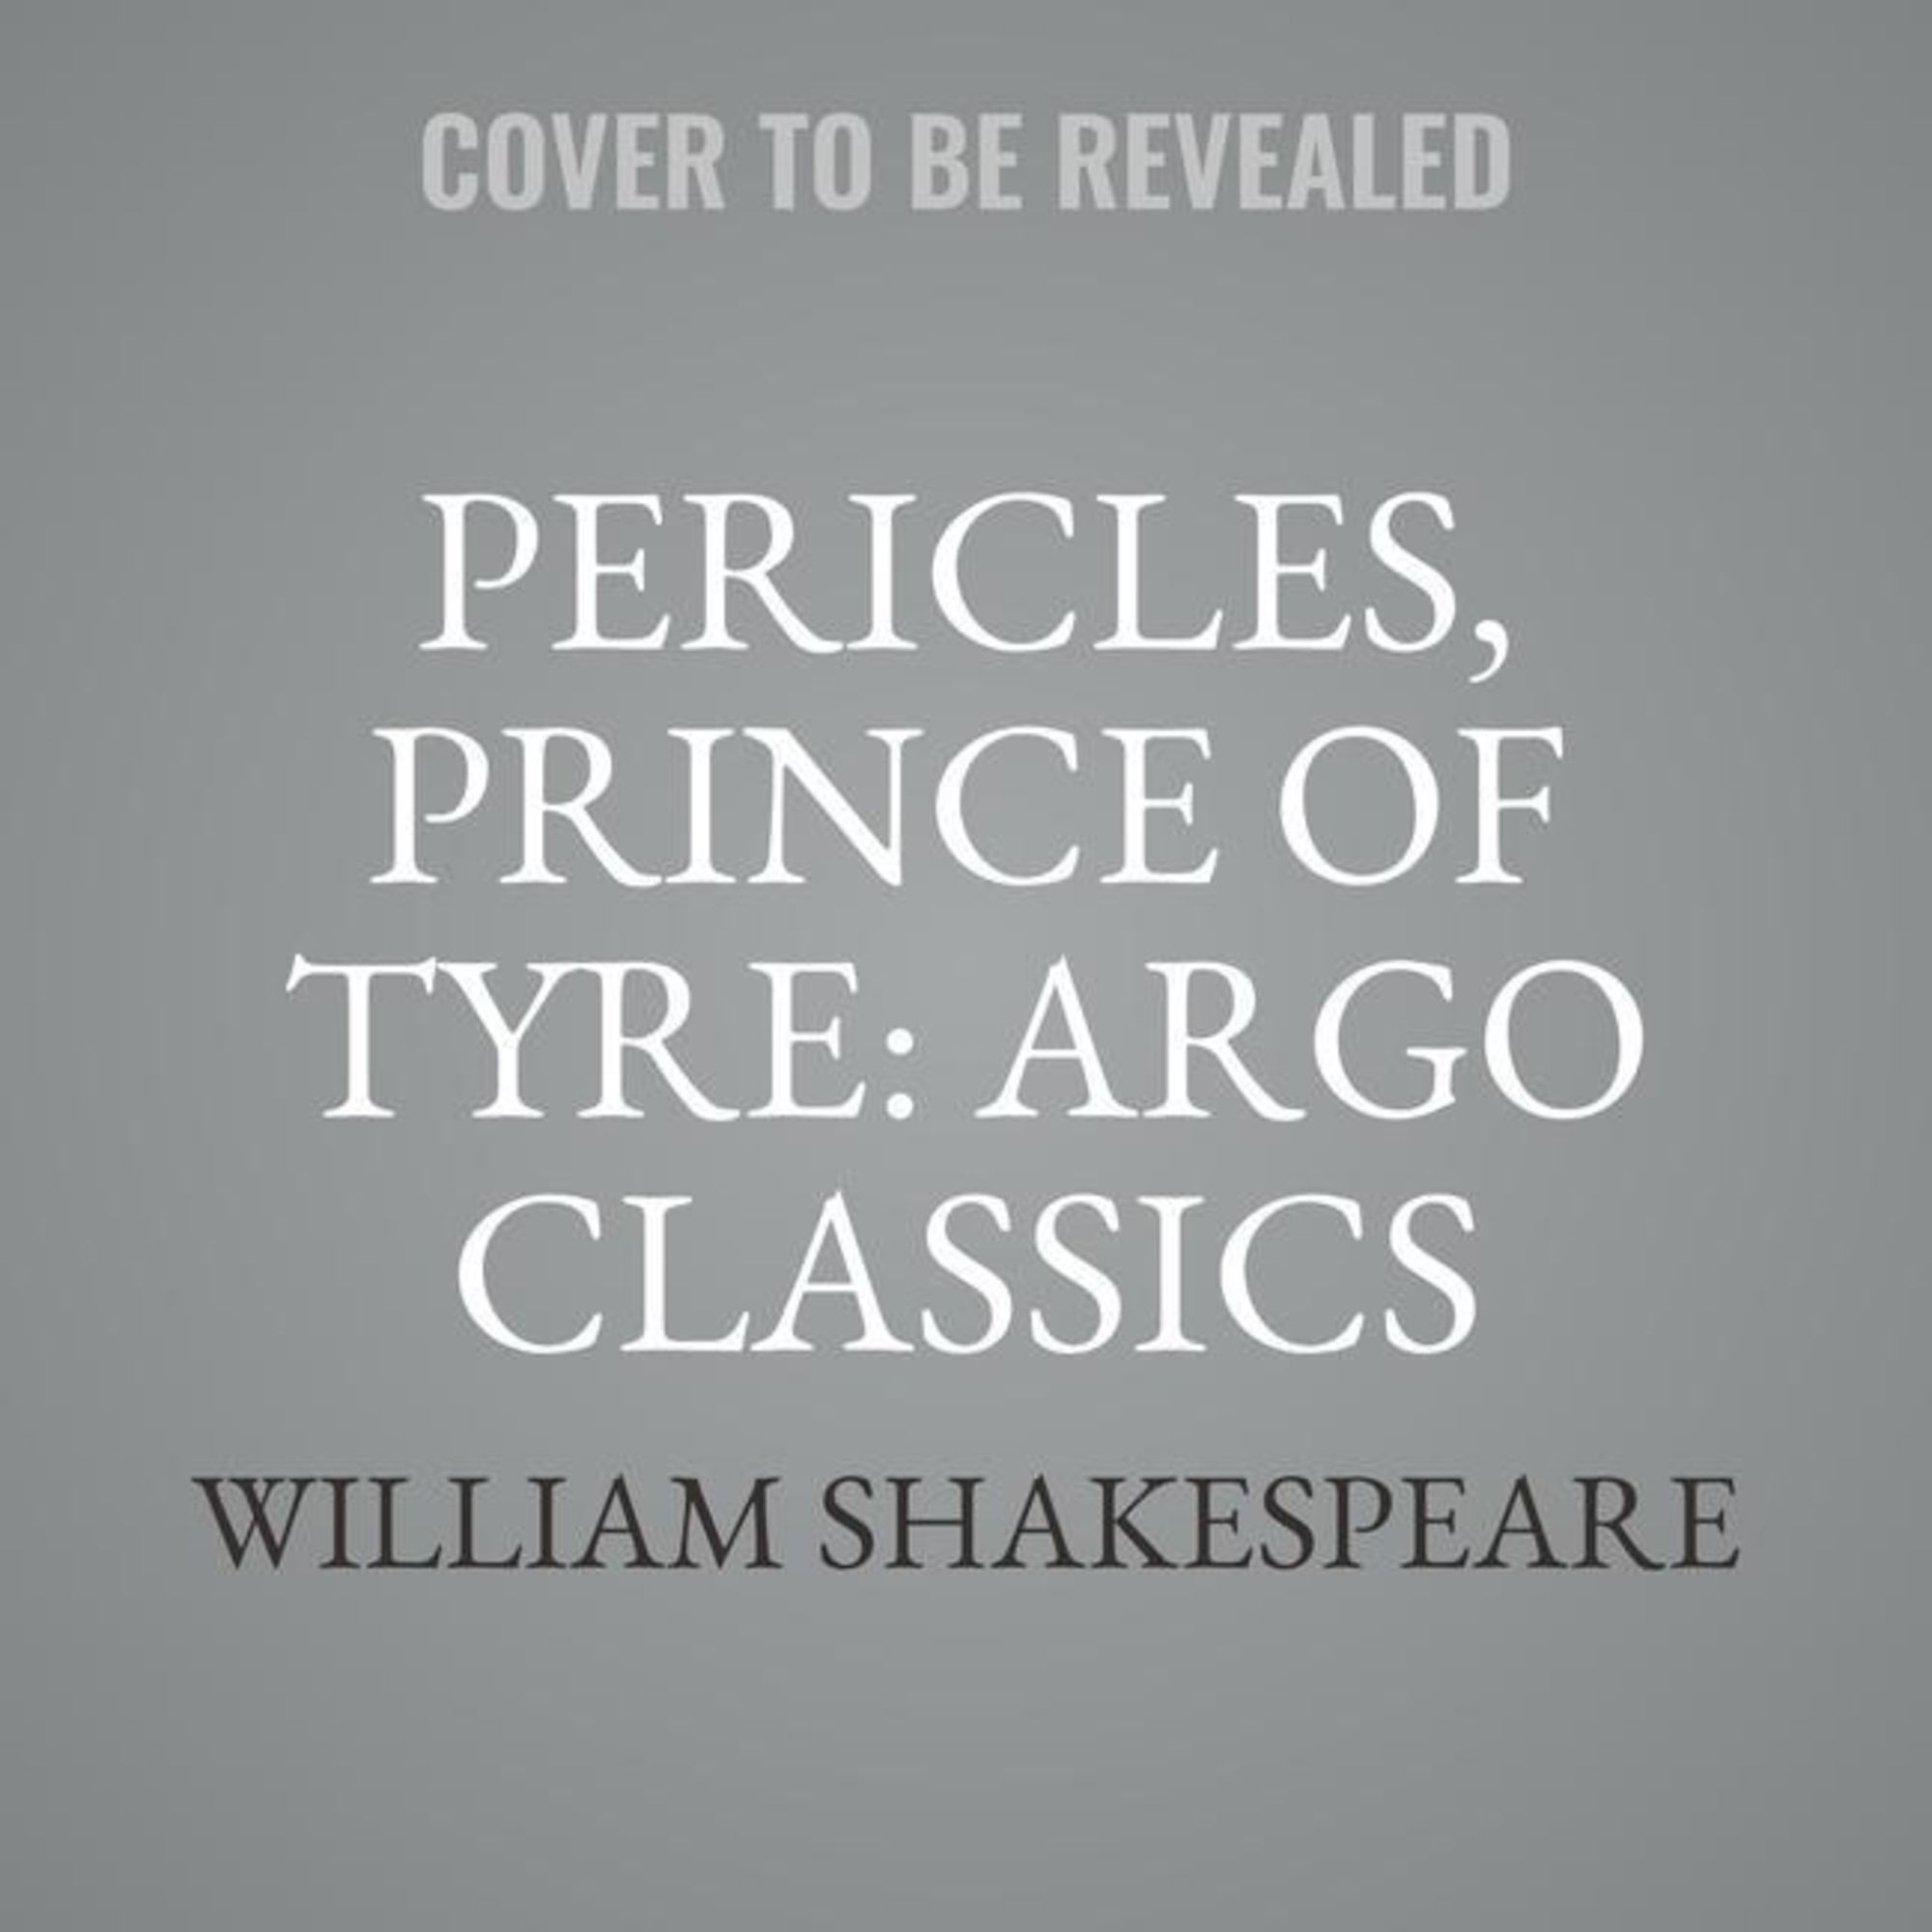 of　Pericles,　von　Prince　Tyre:　'William　Argo　Classics'　Shakespeare'　Hörbuch